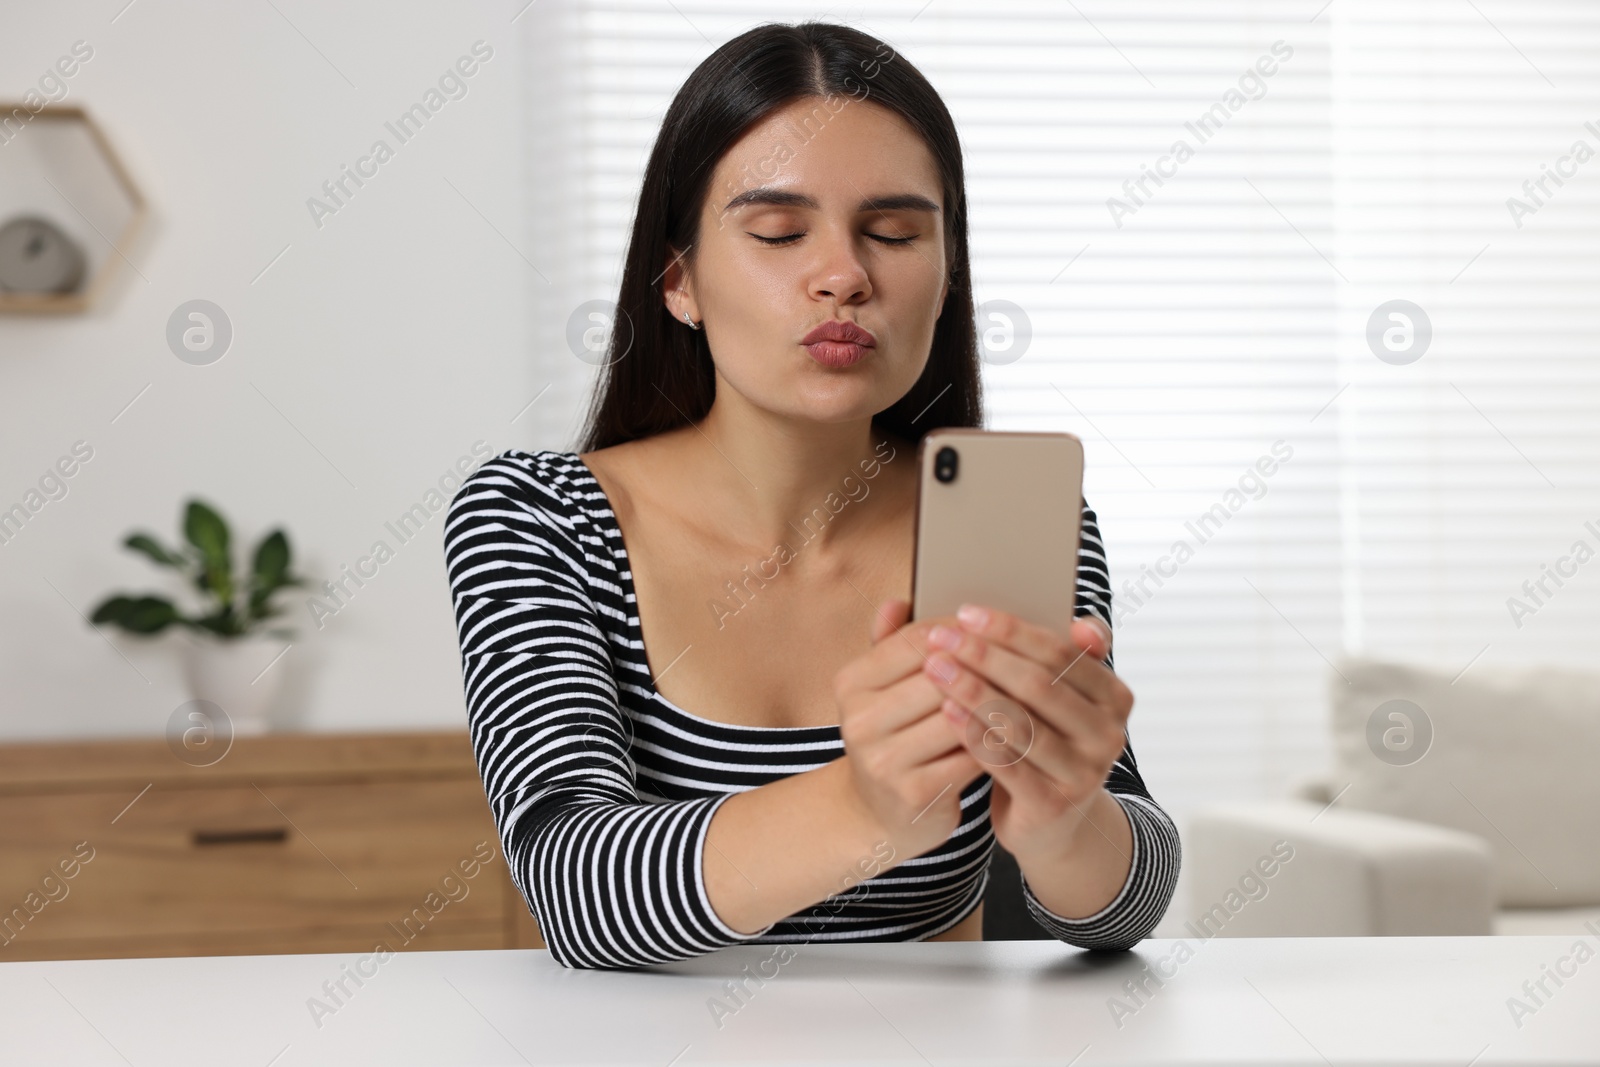 Photo of Young woman having video chat via smartphone and blowing kiss at table in room